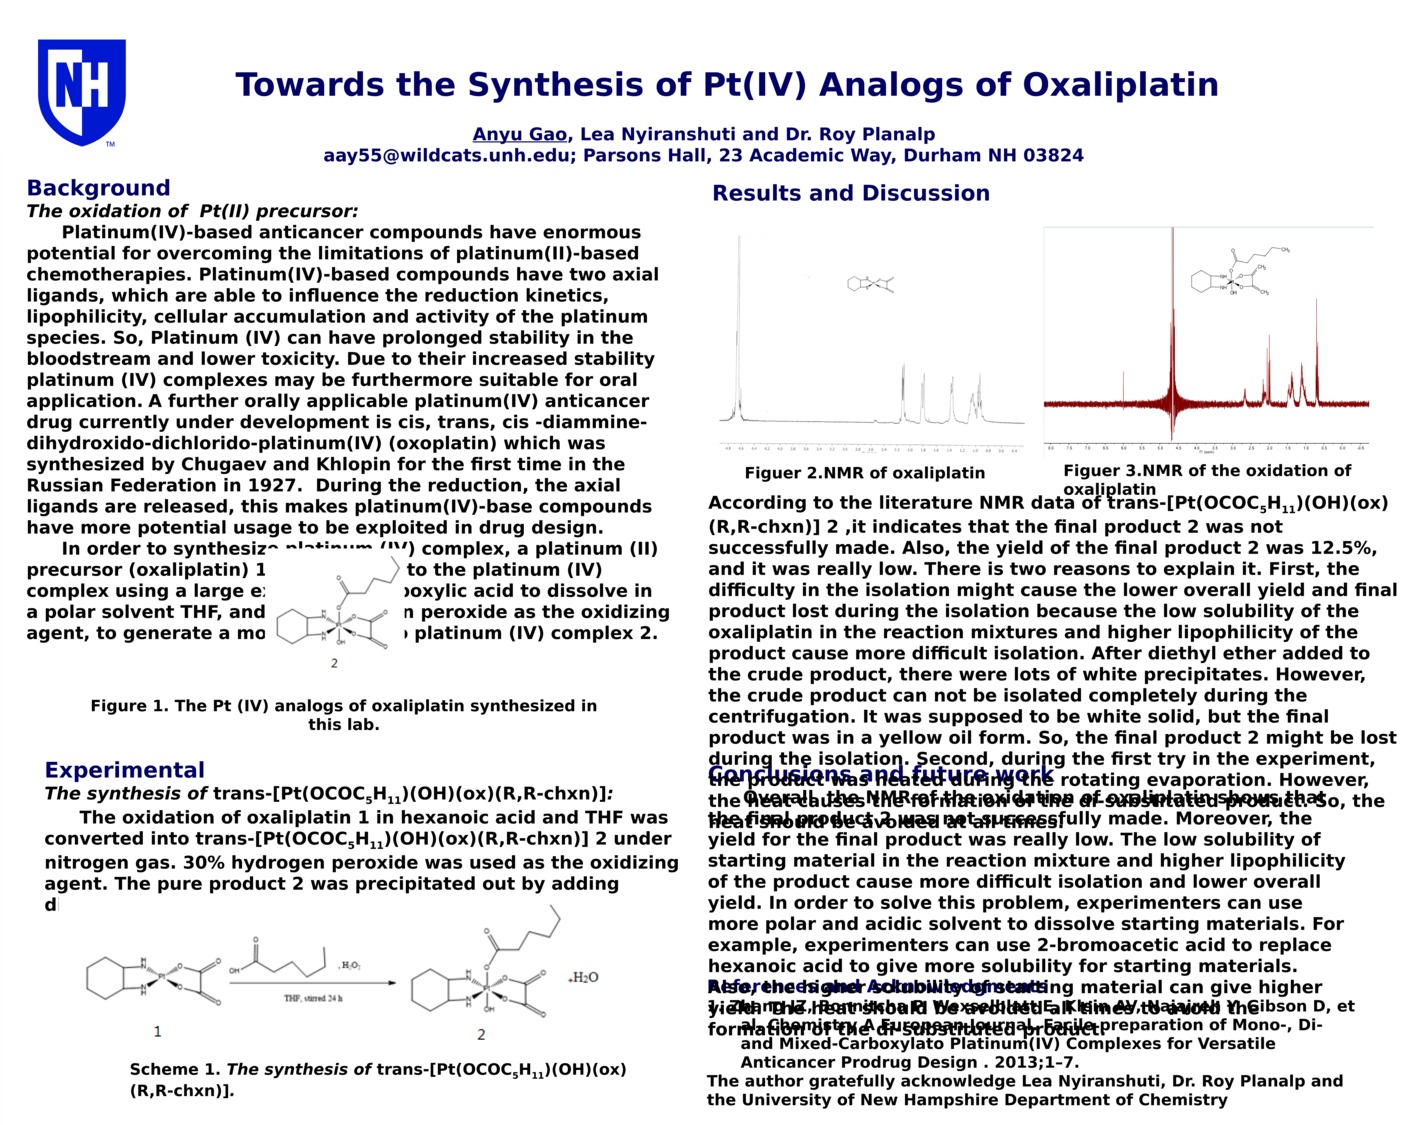 Towards The Synthesis Of Pt(Iv) Analogs Of Oxaliplatin by aay55